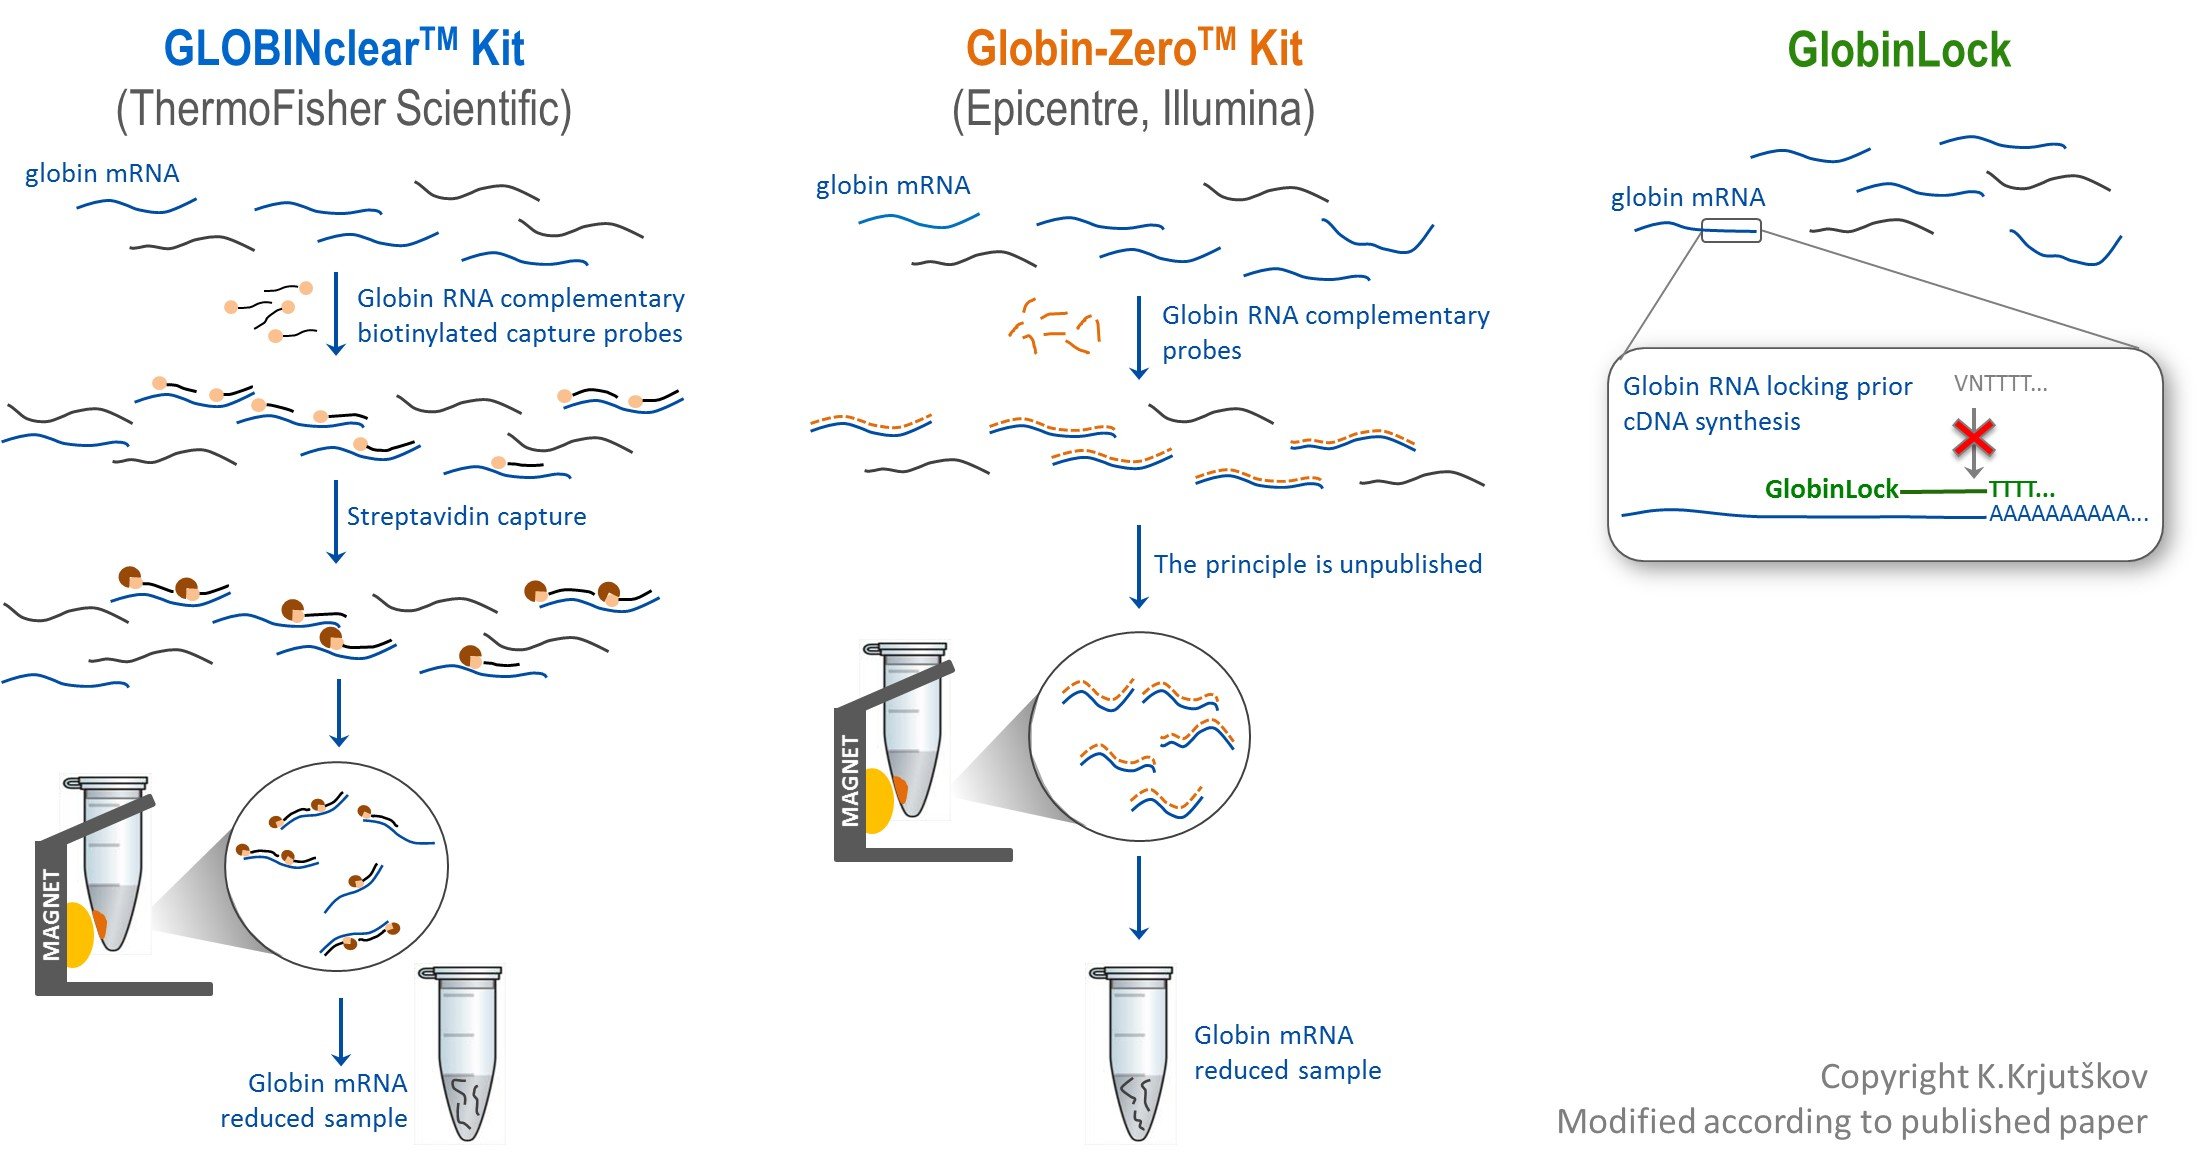 Comparison of two available globin mRNA reduction methods (GLOBINclearTM and Globin-ZeroTM) based on manufacturer’s product information from official webpages. In addition, GlobinLock principle is depicted on right side.